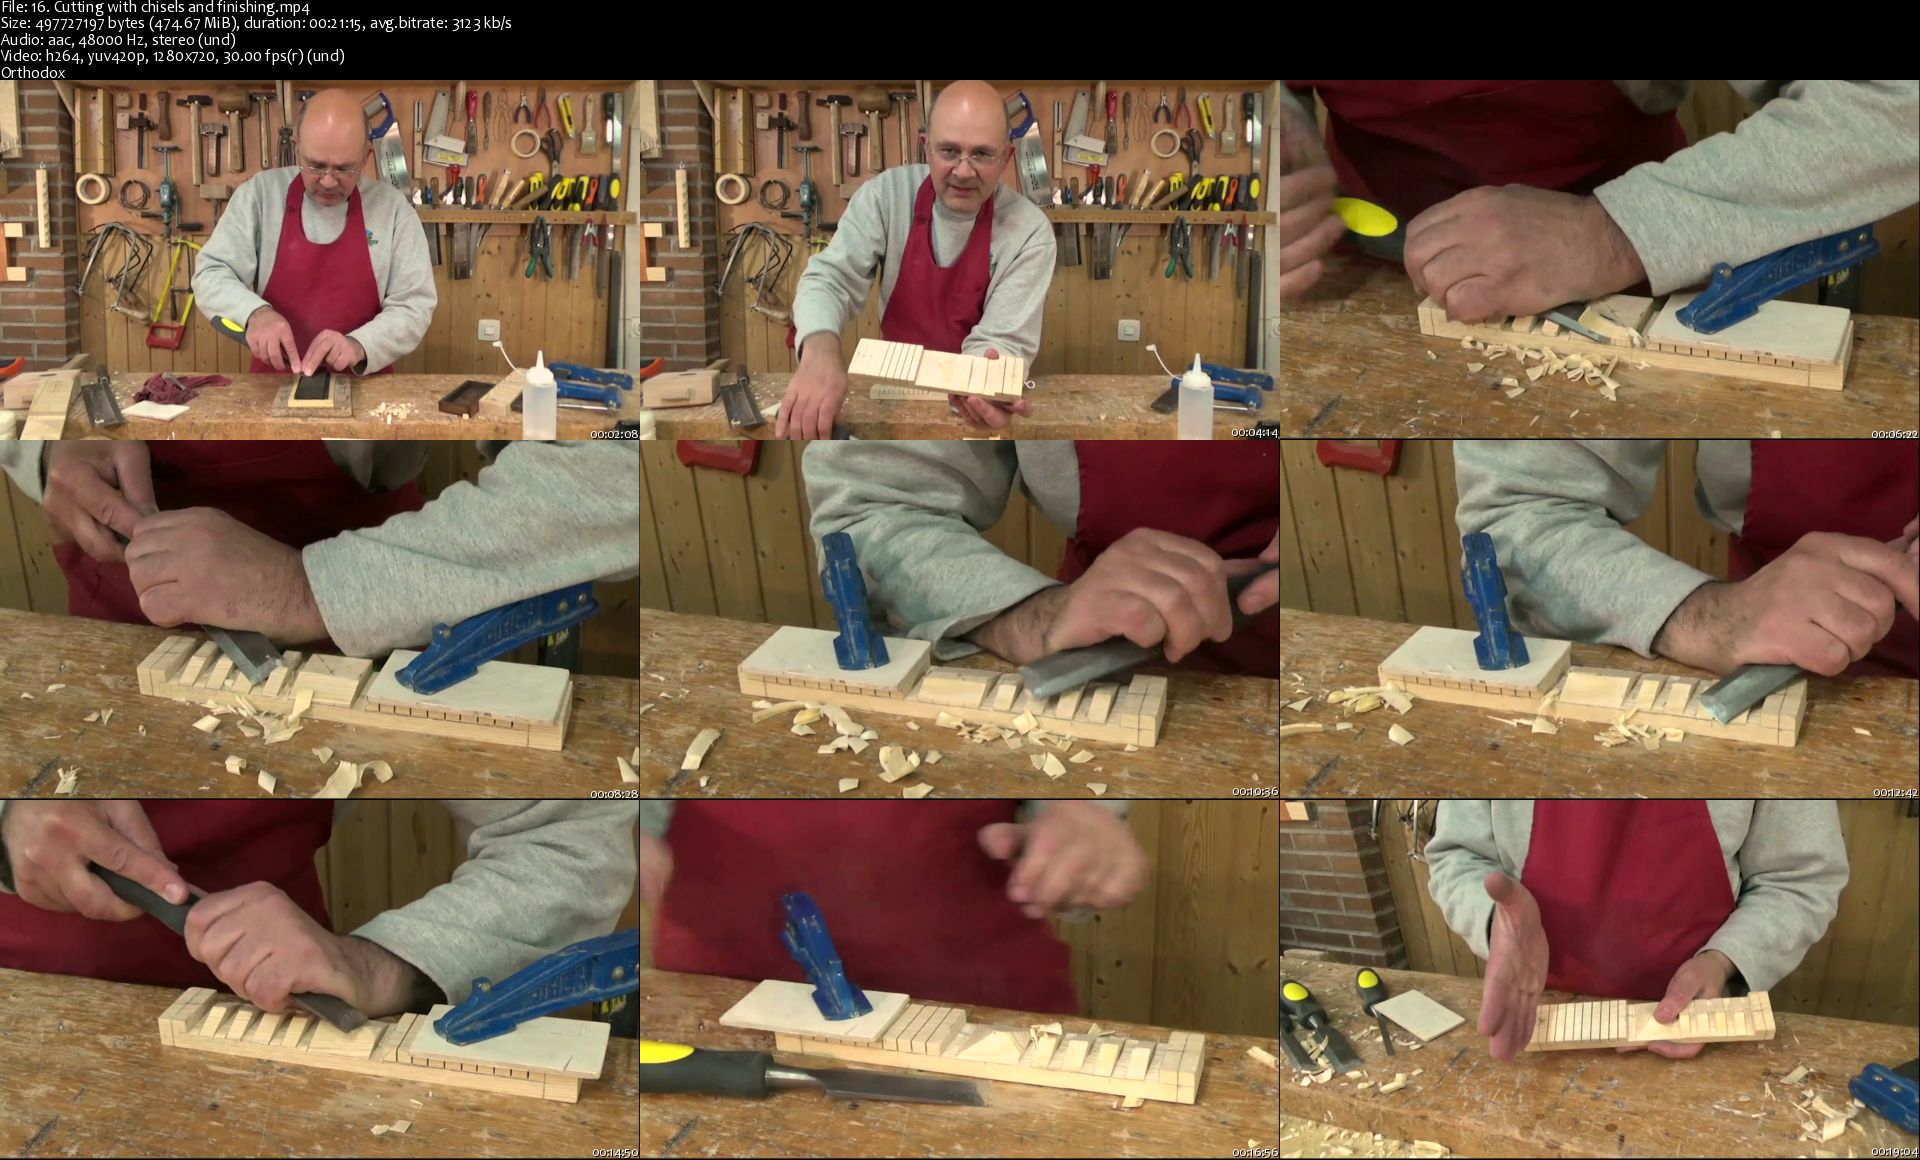 16-Cutting-with-chisels-and-finishing-s.jpg